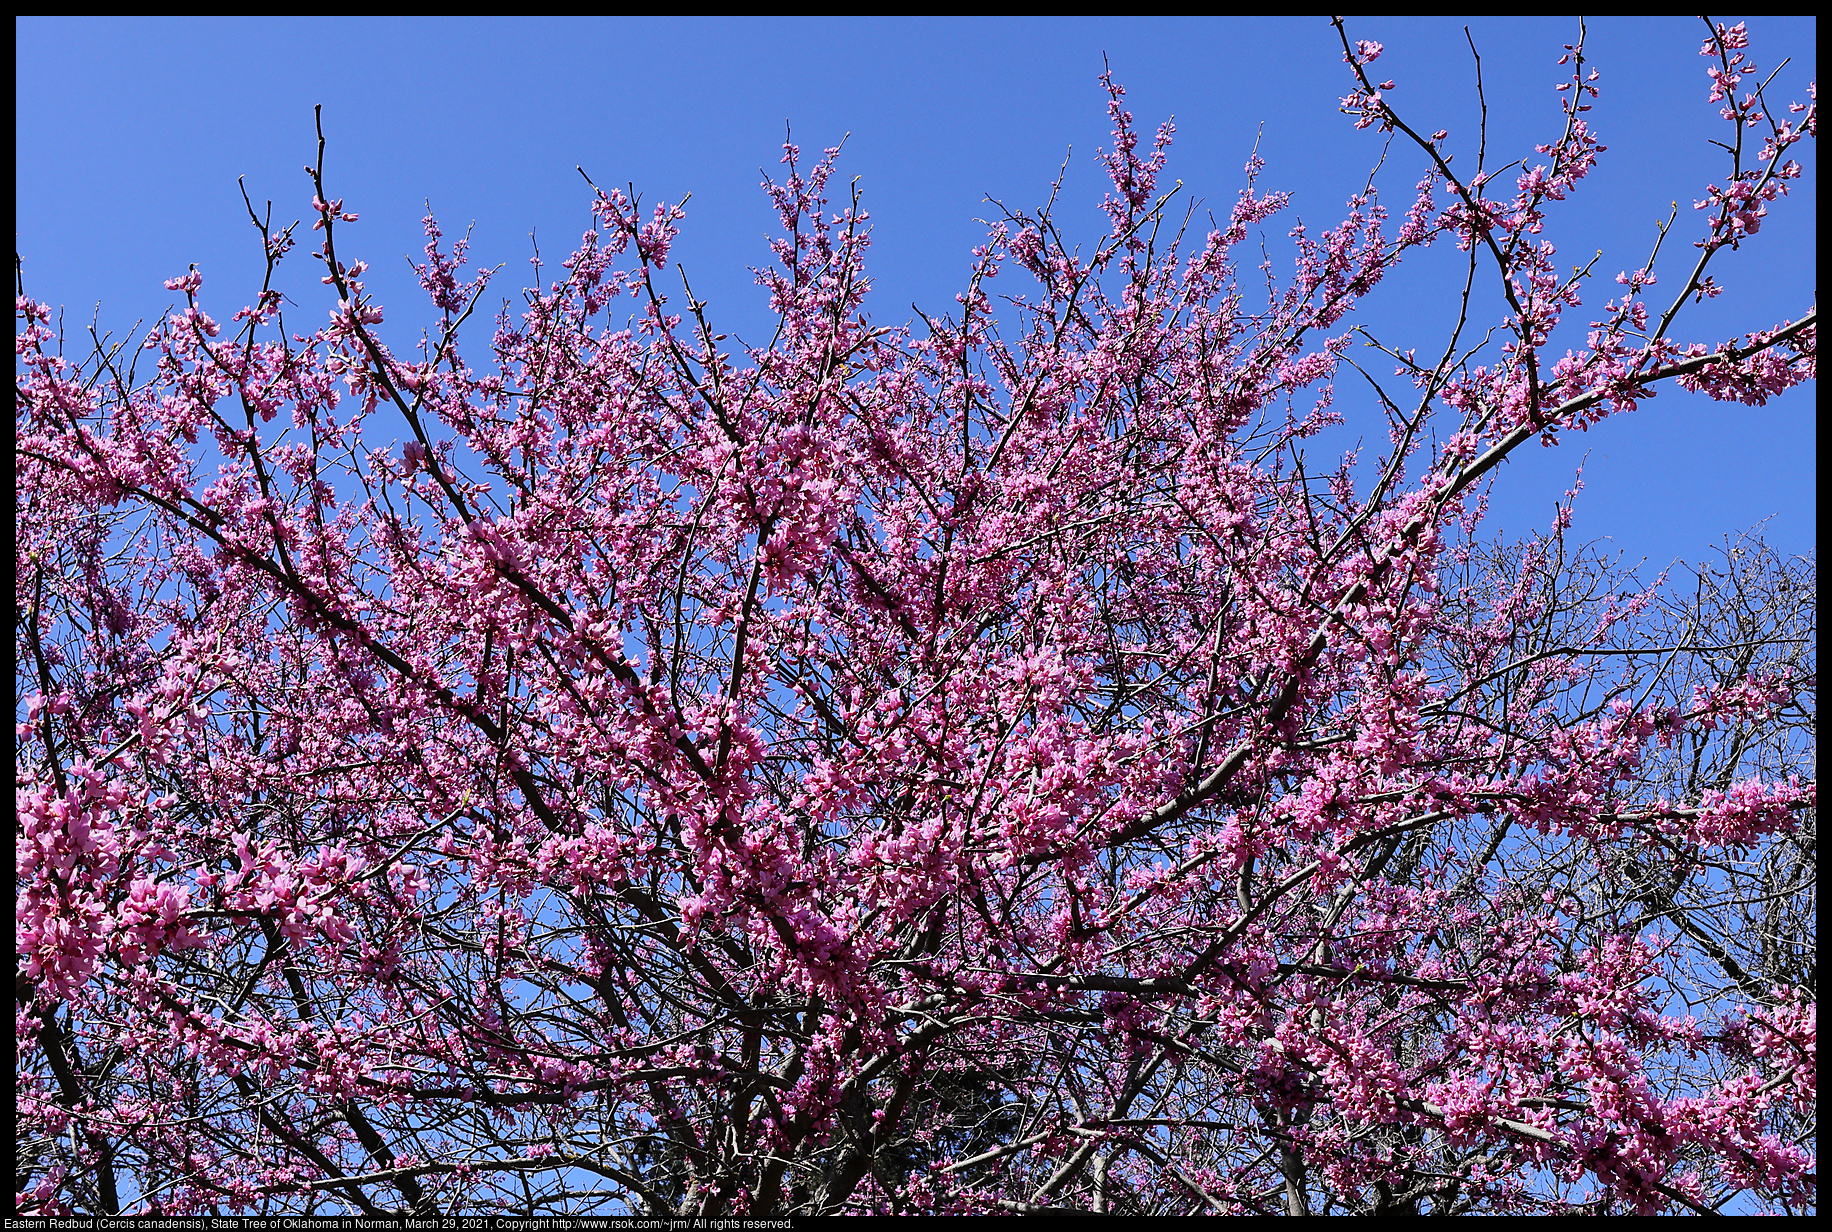 Eastern Redbud (Cercis canadensis), State Tree of Oklahoma in Norman, March 29, 2021